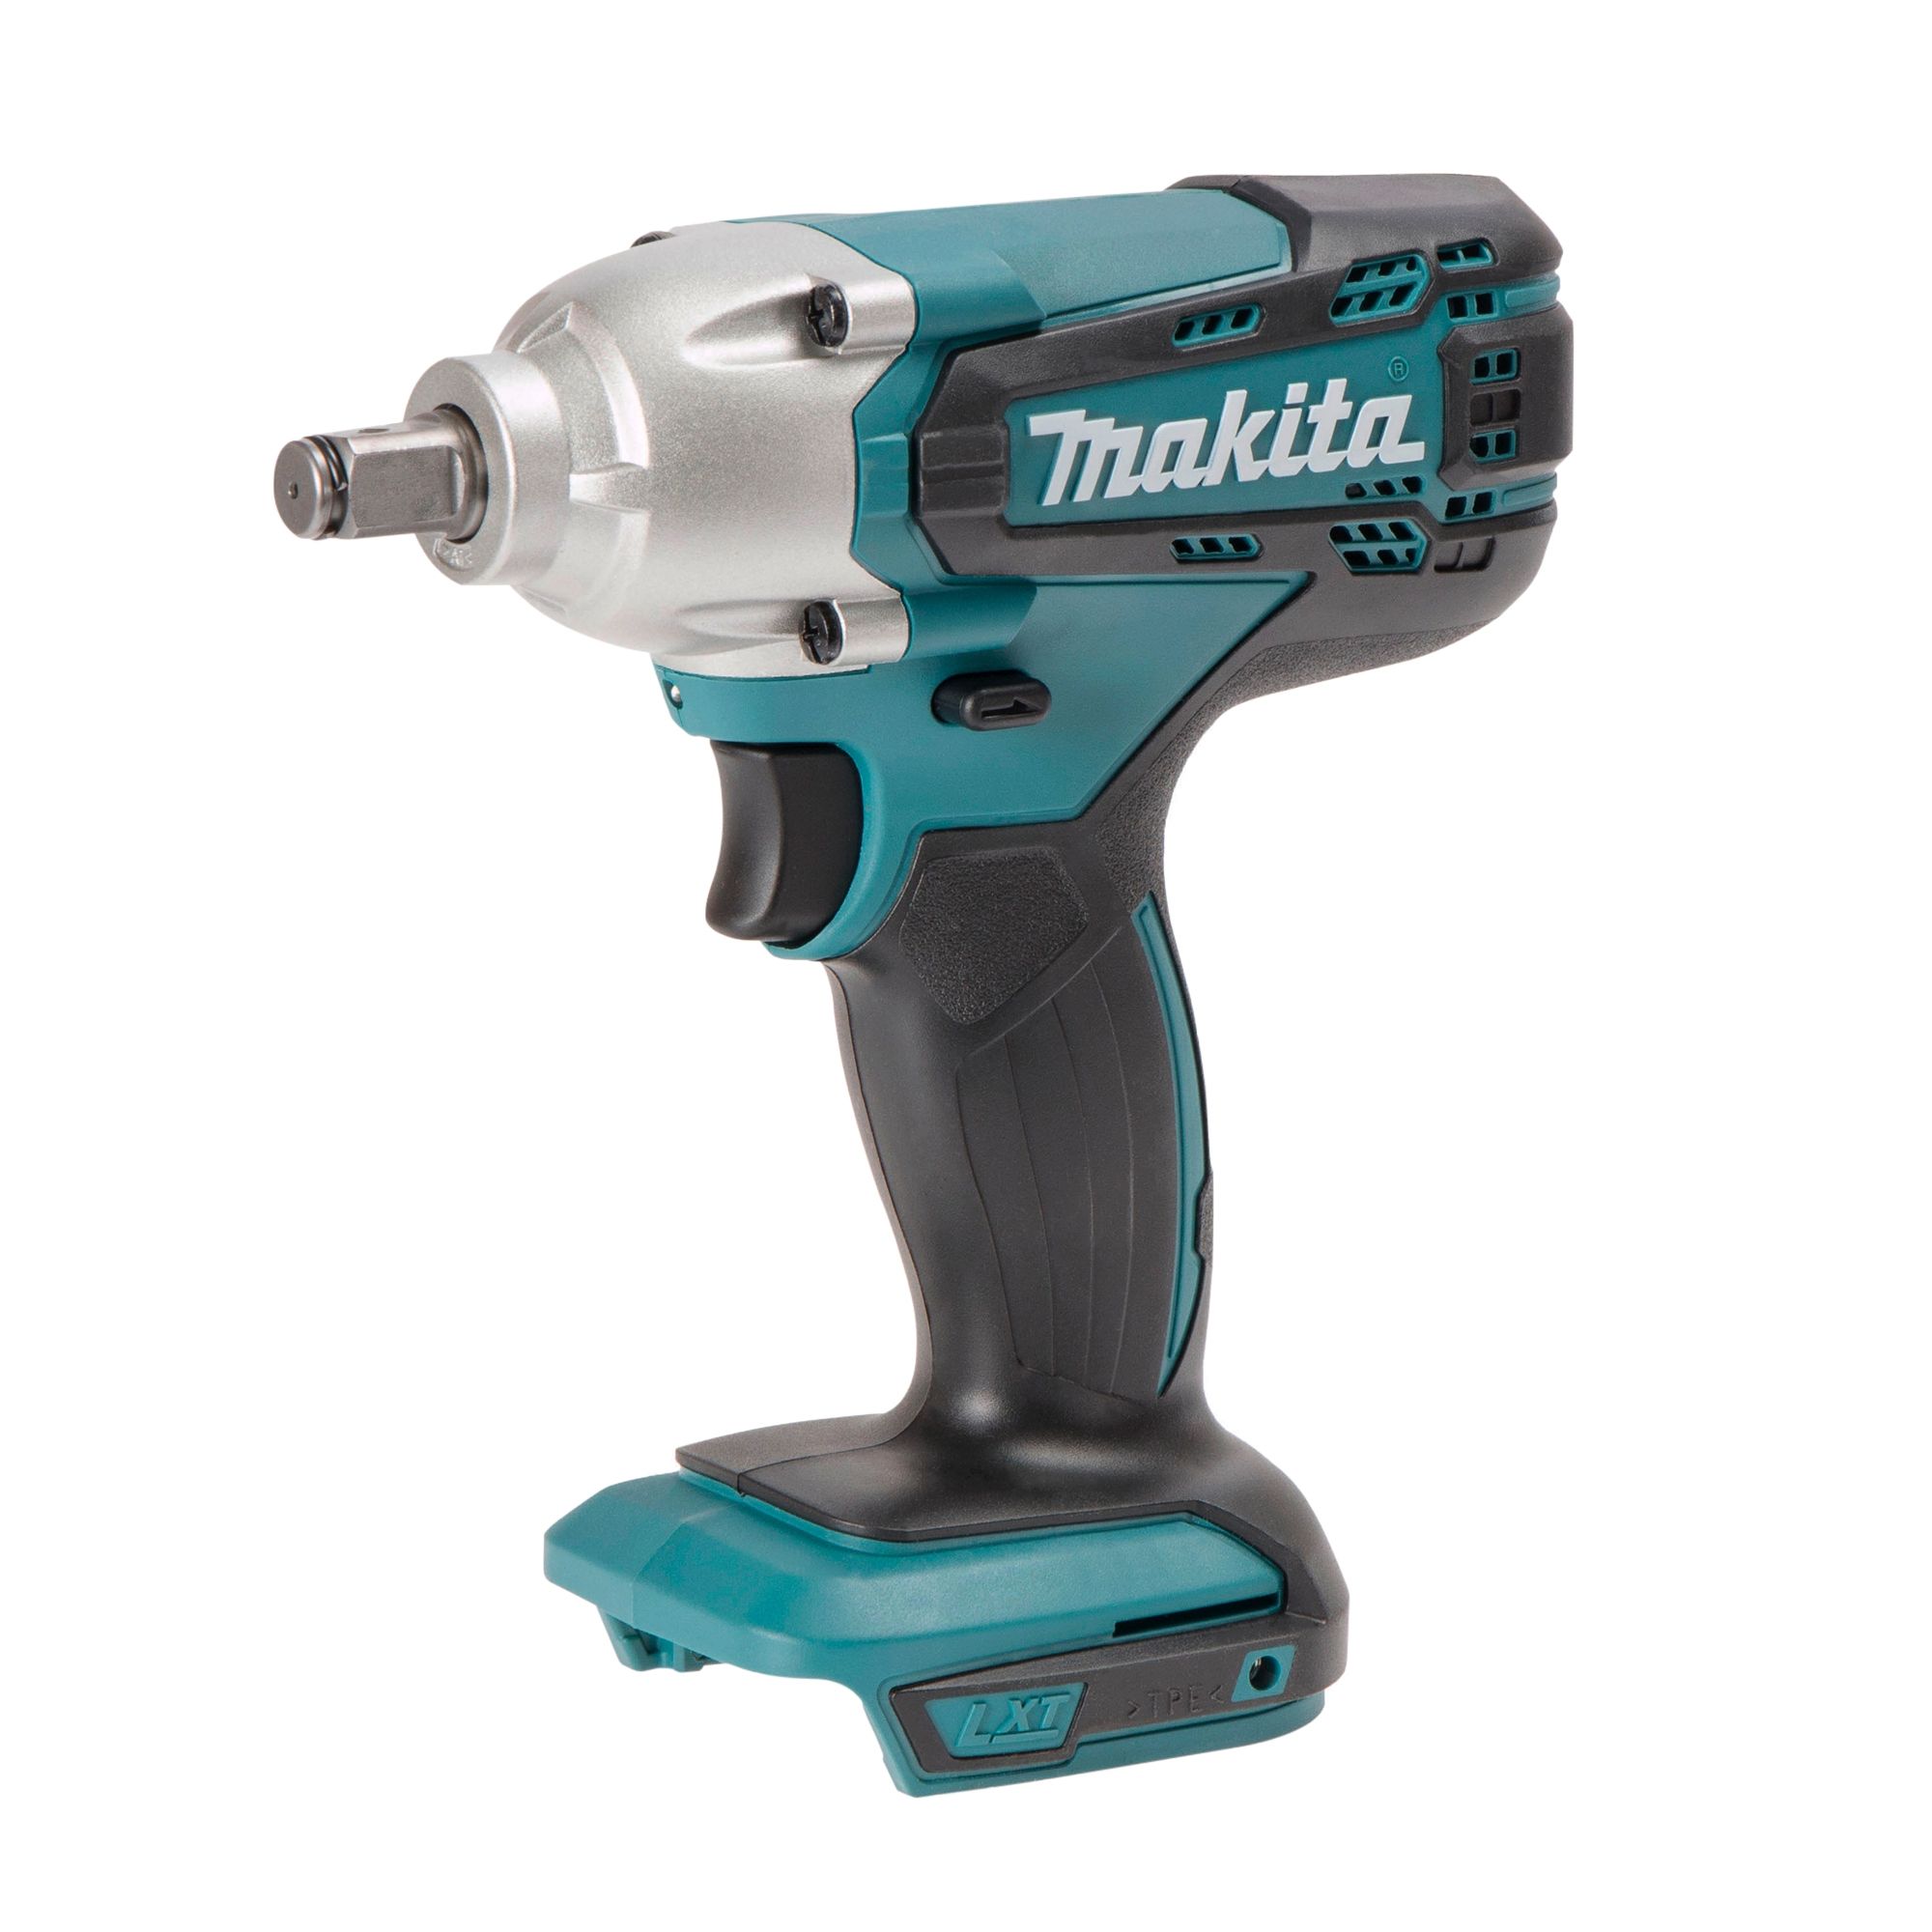 Makita DTW190Z 18V LXT Li-ion Cordless 1/2" Square Impact Wrench Body Only 